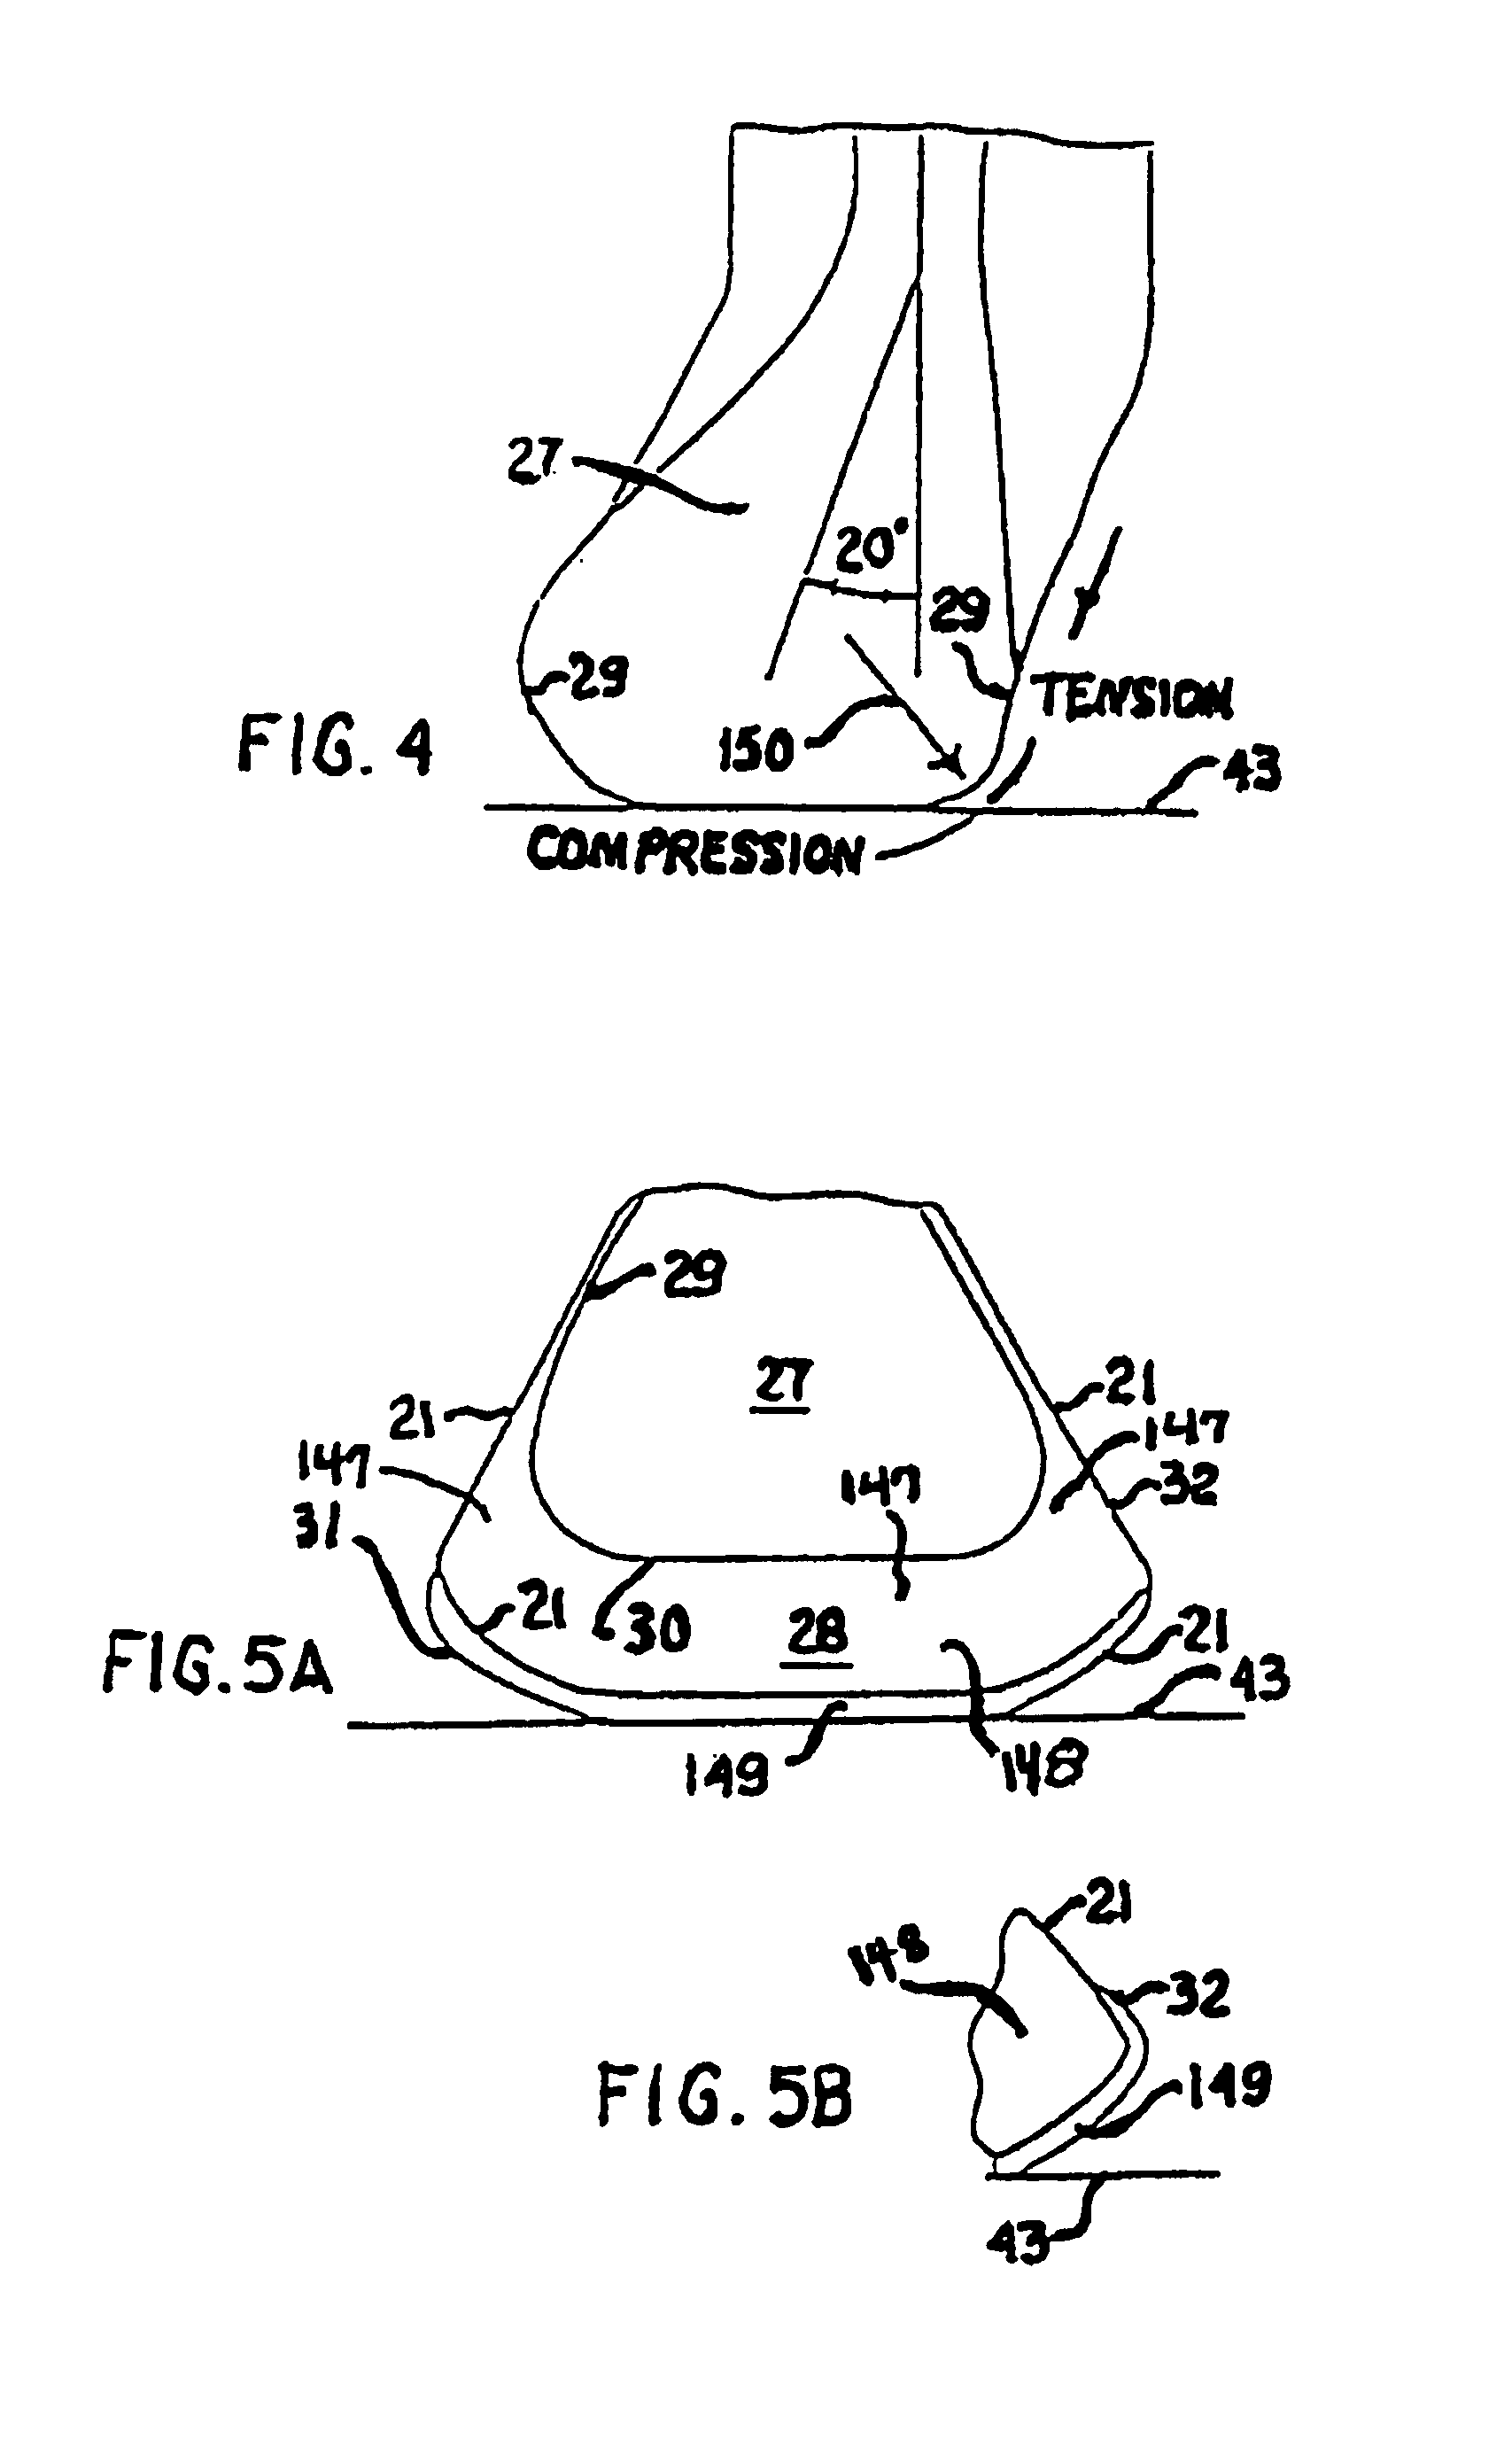 Shoe sole orthotic structures and computer controlled compartments